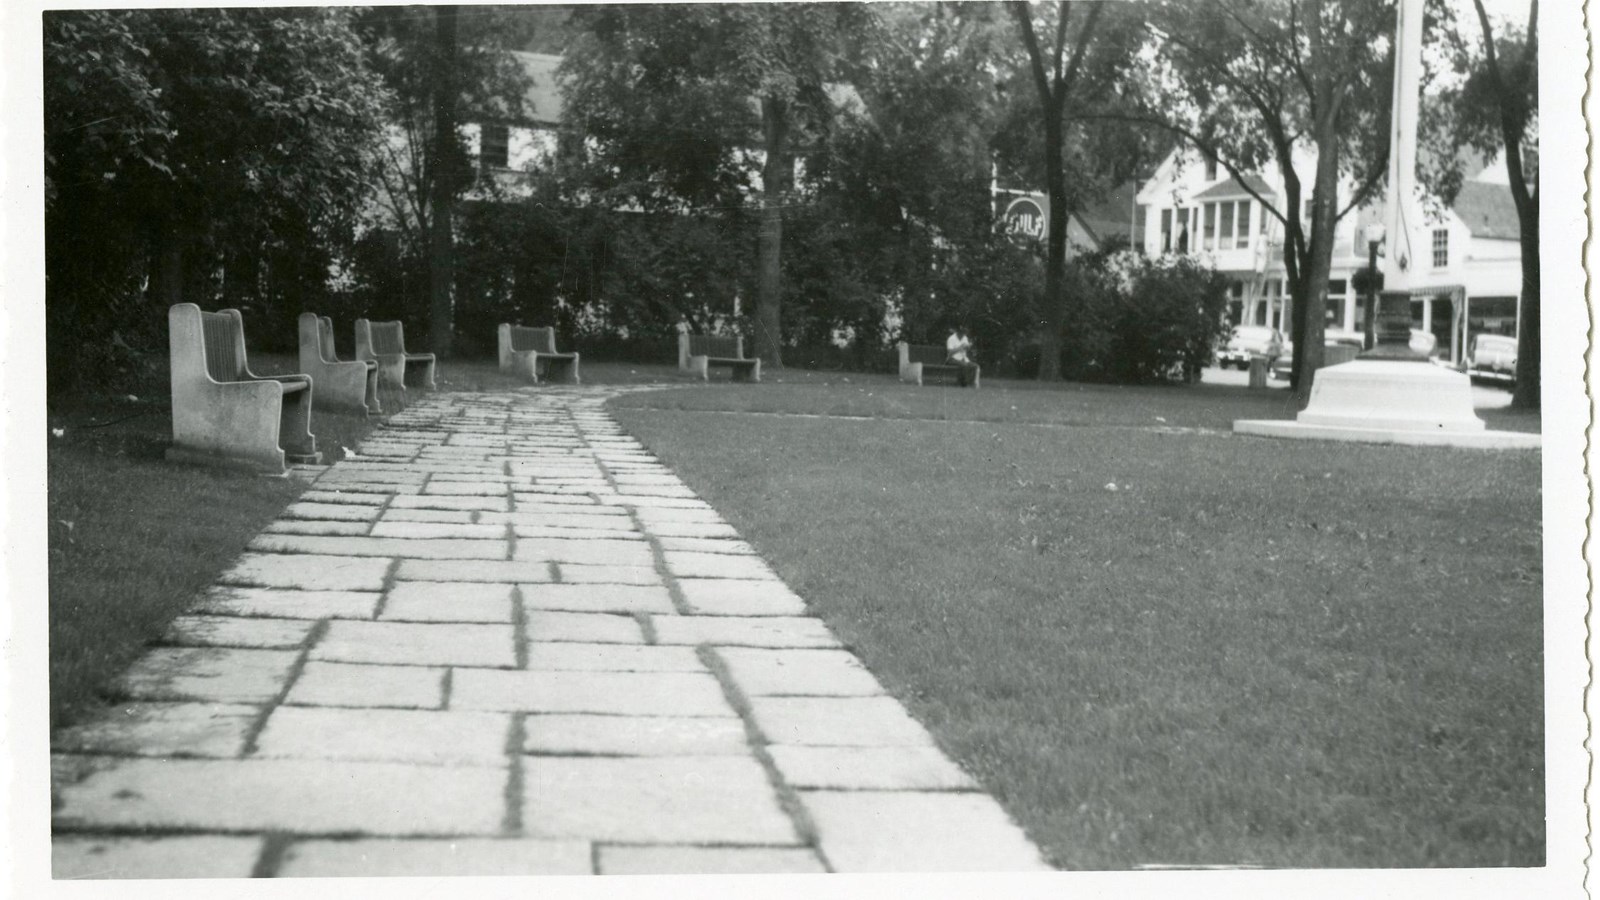 Black and white of brick path curving through grassy area with benches lining one side